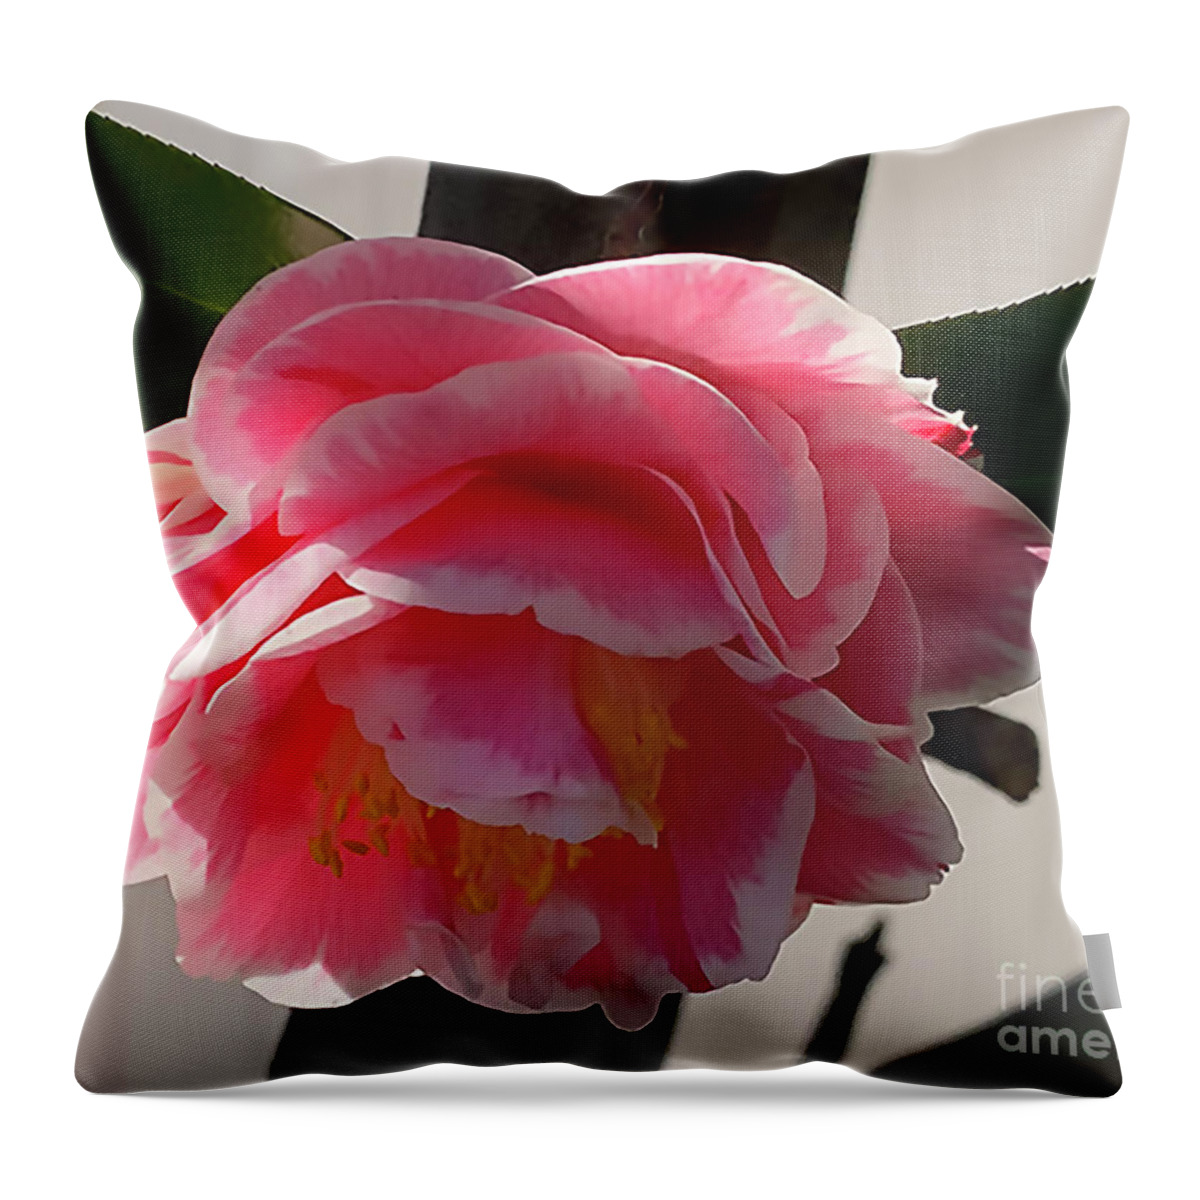 Floral Throw Pillow featuring the digital art Pink And White Camellia Bloom by Kirt Tisdale